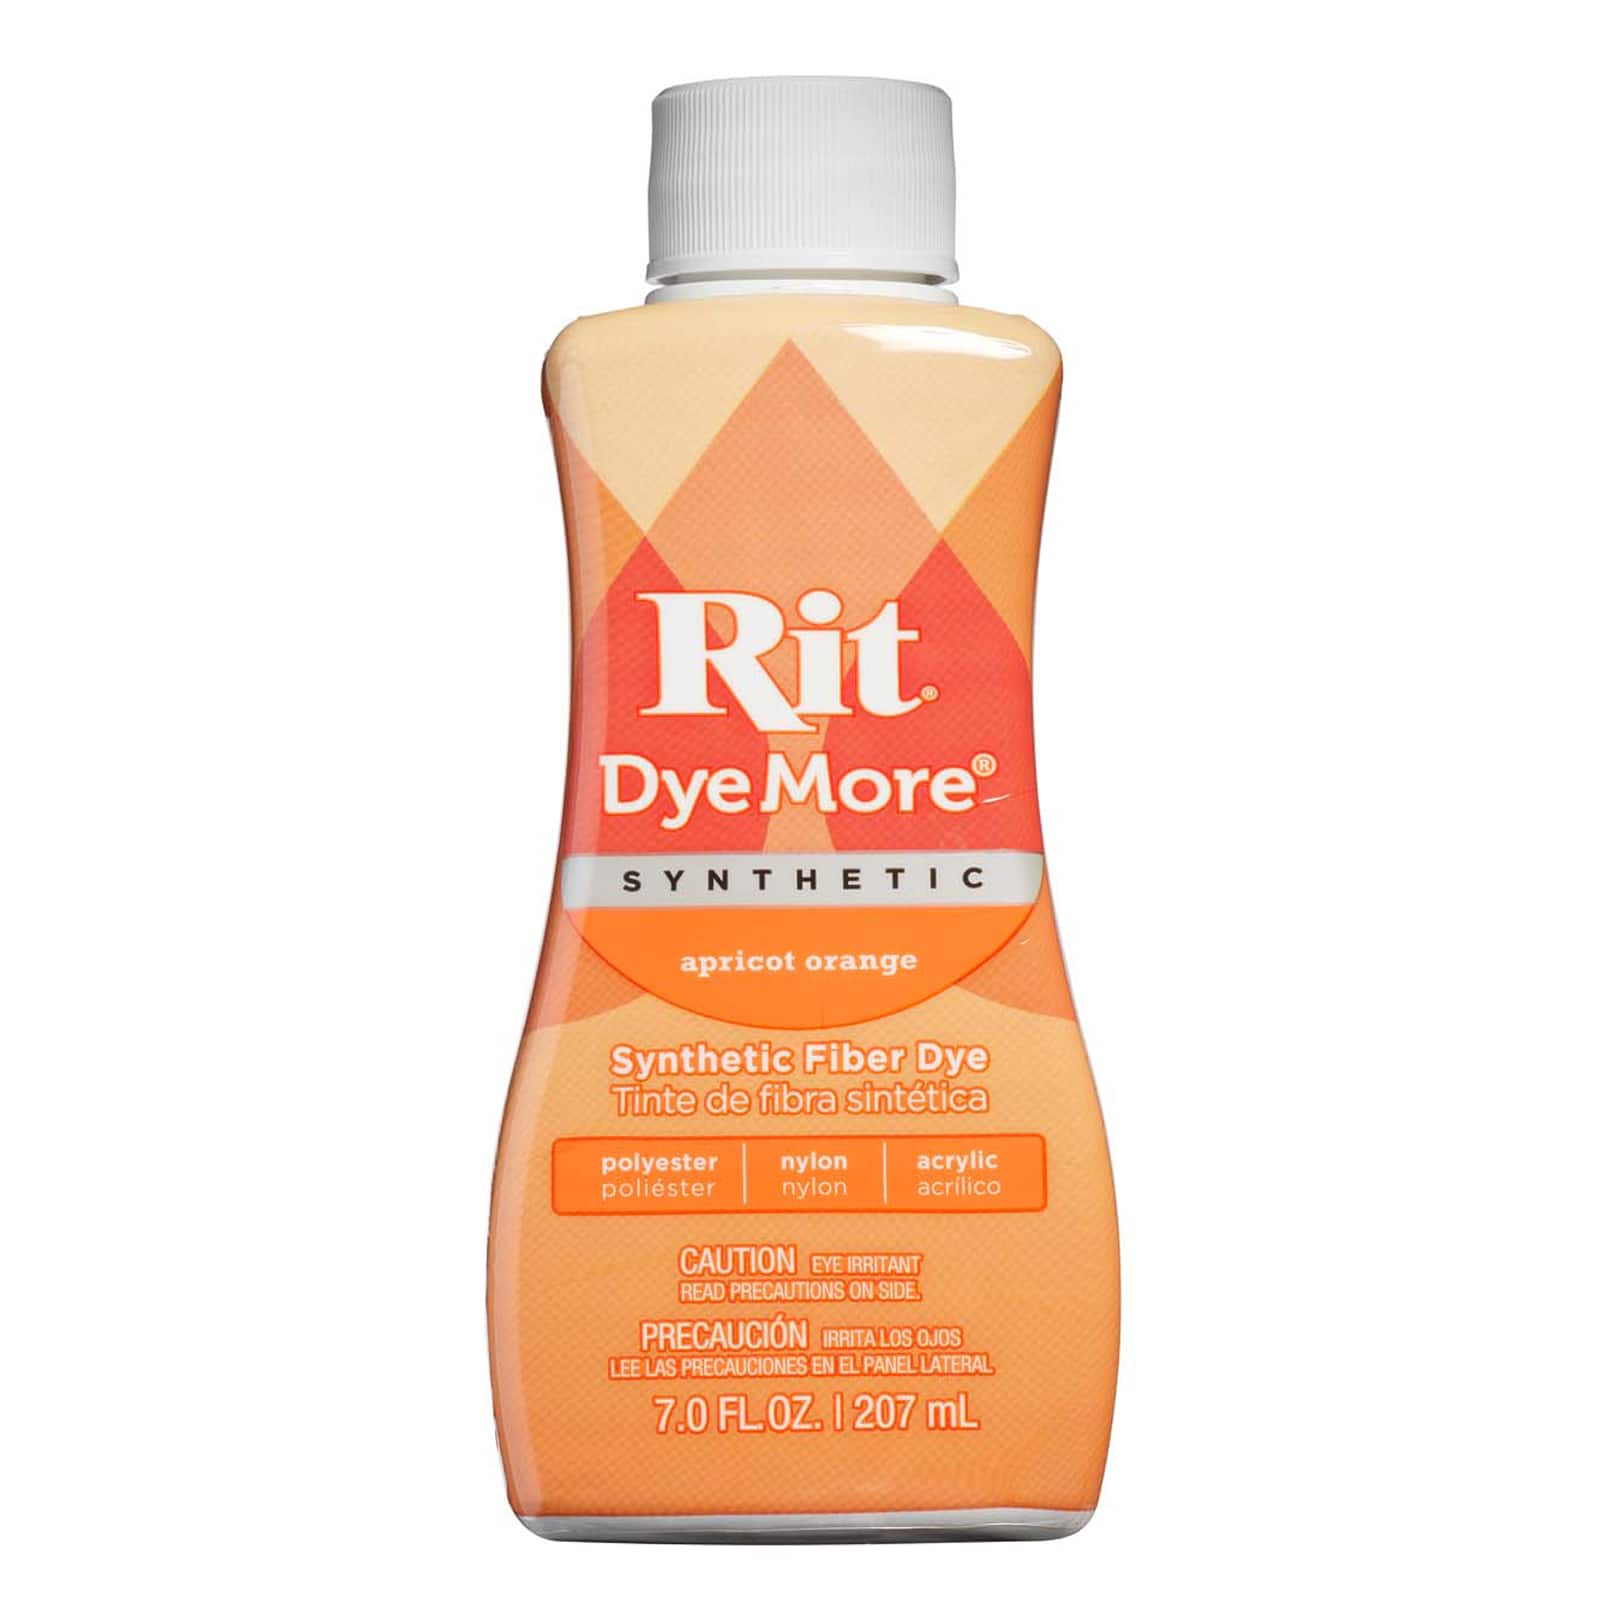 Rit Dye - With so many diverse synthetic fabrics and materials out there,  we thought it was high time to offer a dye capable of taking those very  fabrics and materials to